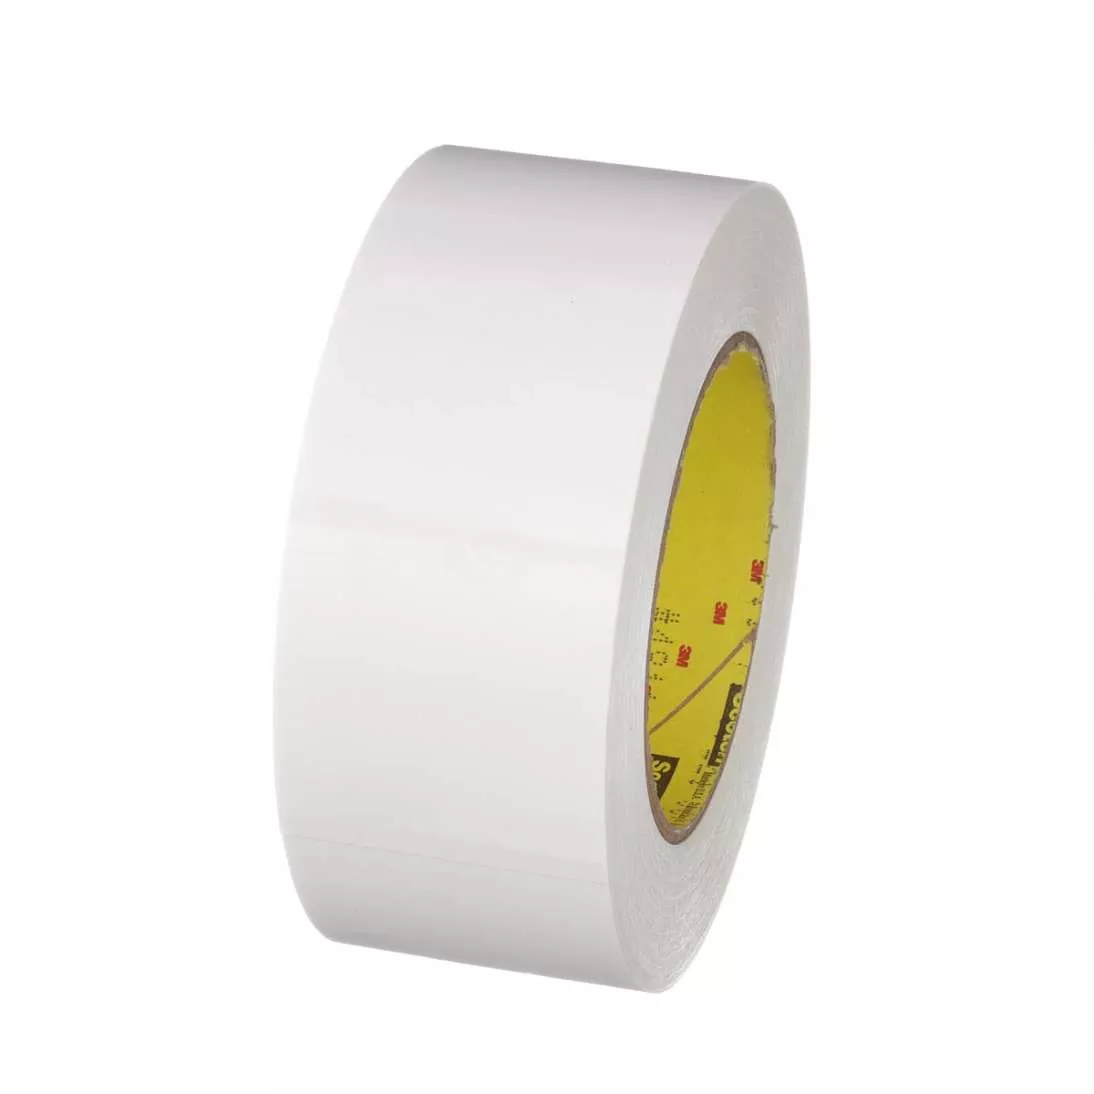 3M™ Preservation Sealing Tape 4811, White, 2 in x 36 yd, 9.5 mil, 24
rolls per case